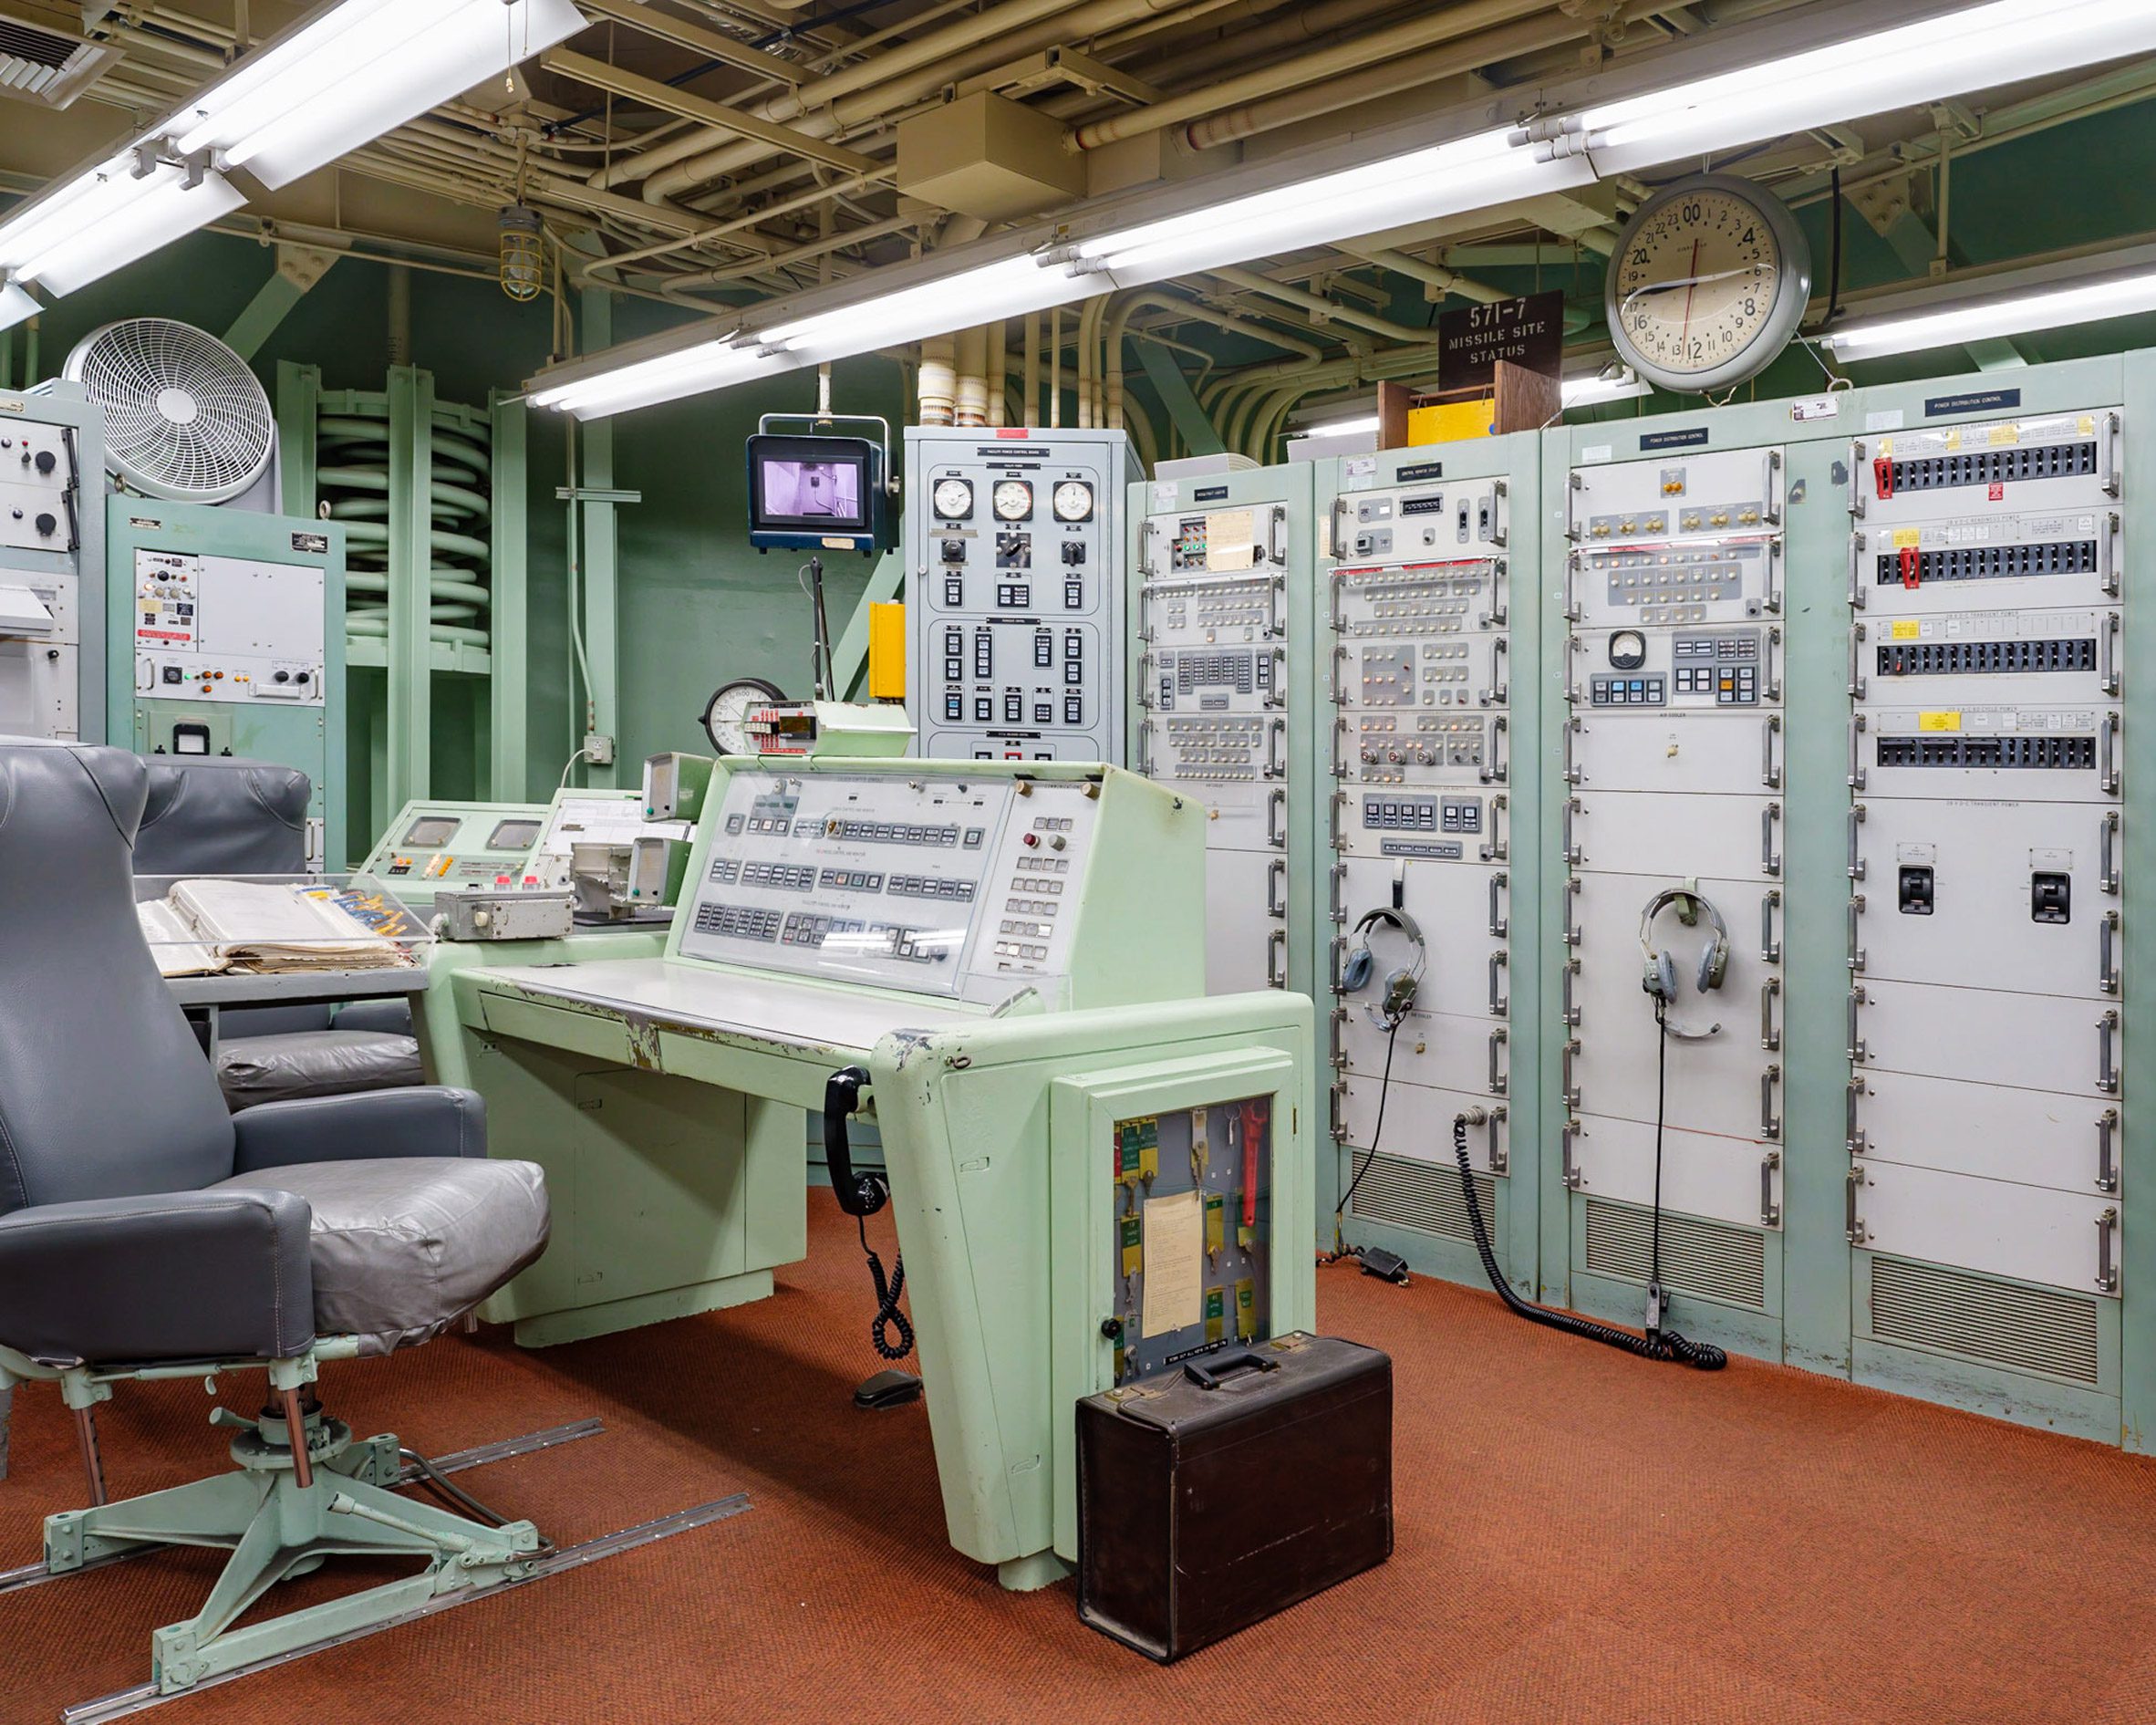 Launch Control Centre of Titan II Nuclear Missile, Arizona, USA, 2022. Taken from Building Stories by Alastair Philip Wiper